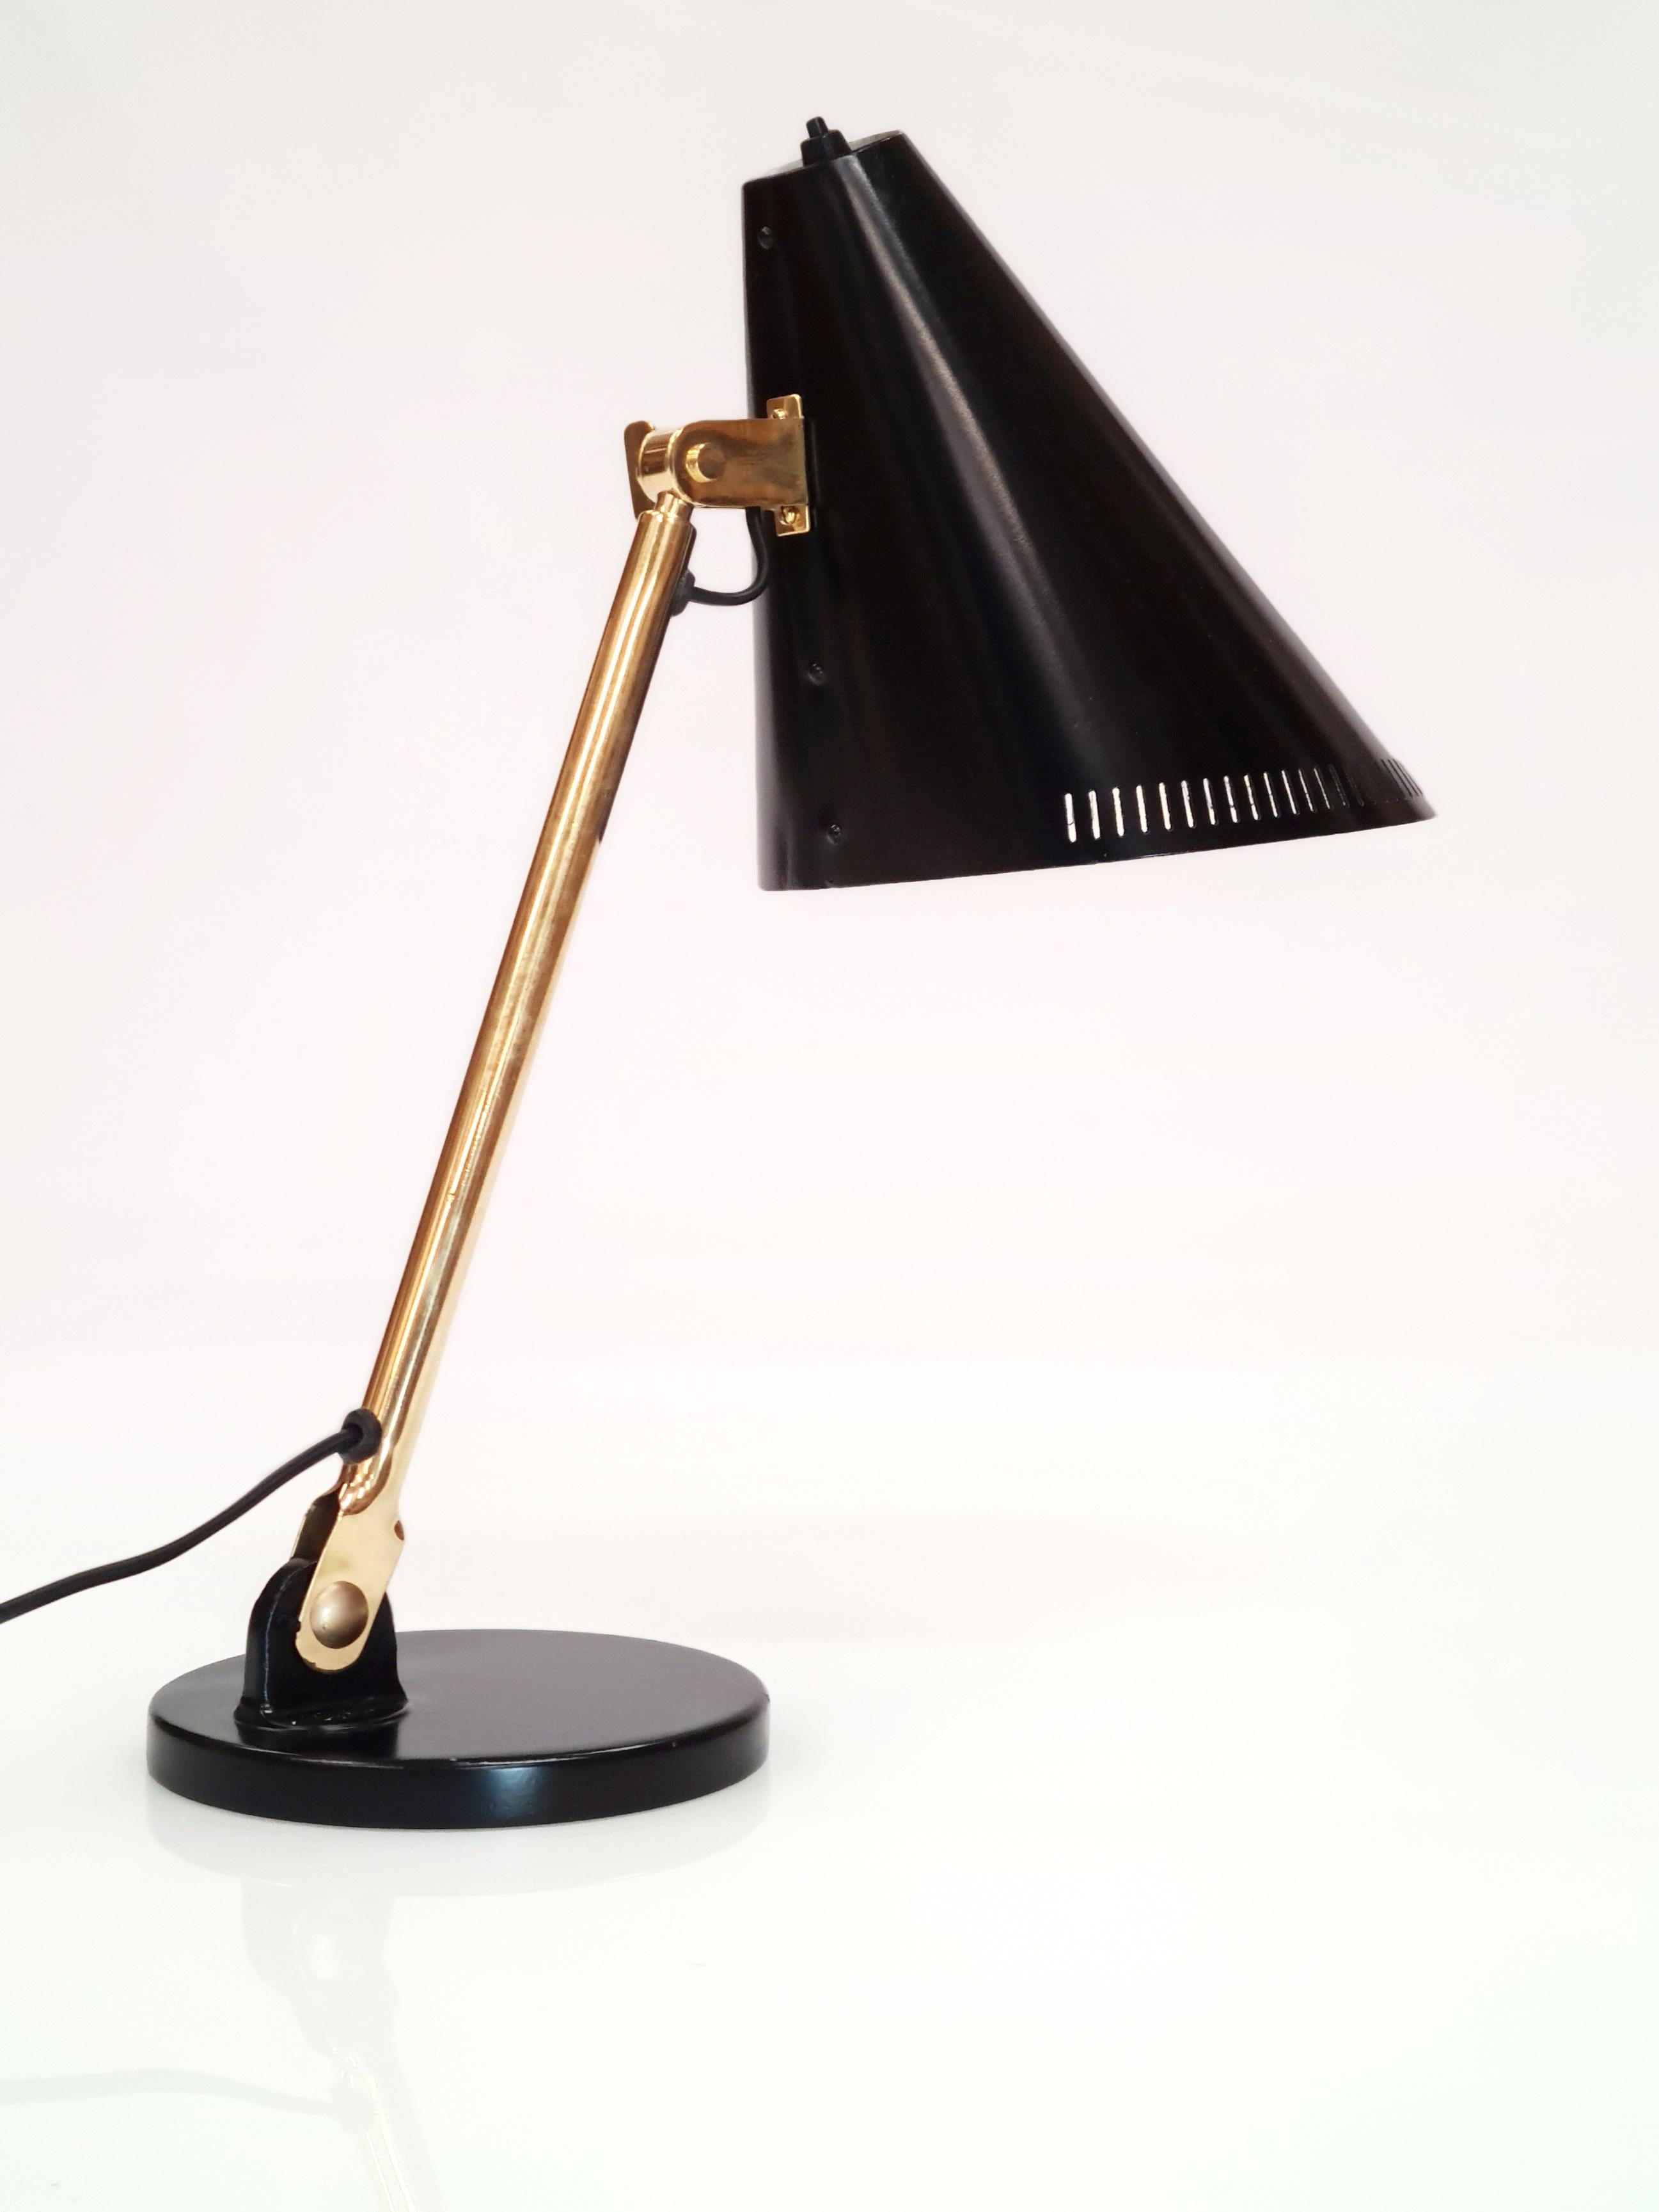 This early table lamp design by Paavo Tynell is well recognized and considered by many as the pivotal point at which a shift in his designs started appearing. It was one of the first designs that had perforations / slits and adjustability in height